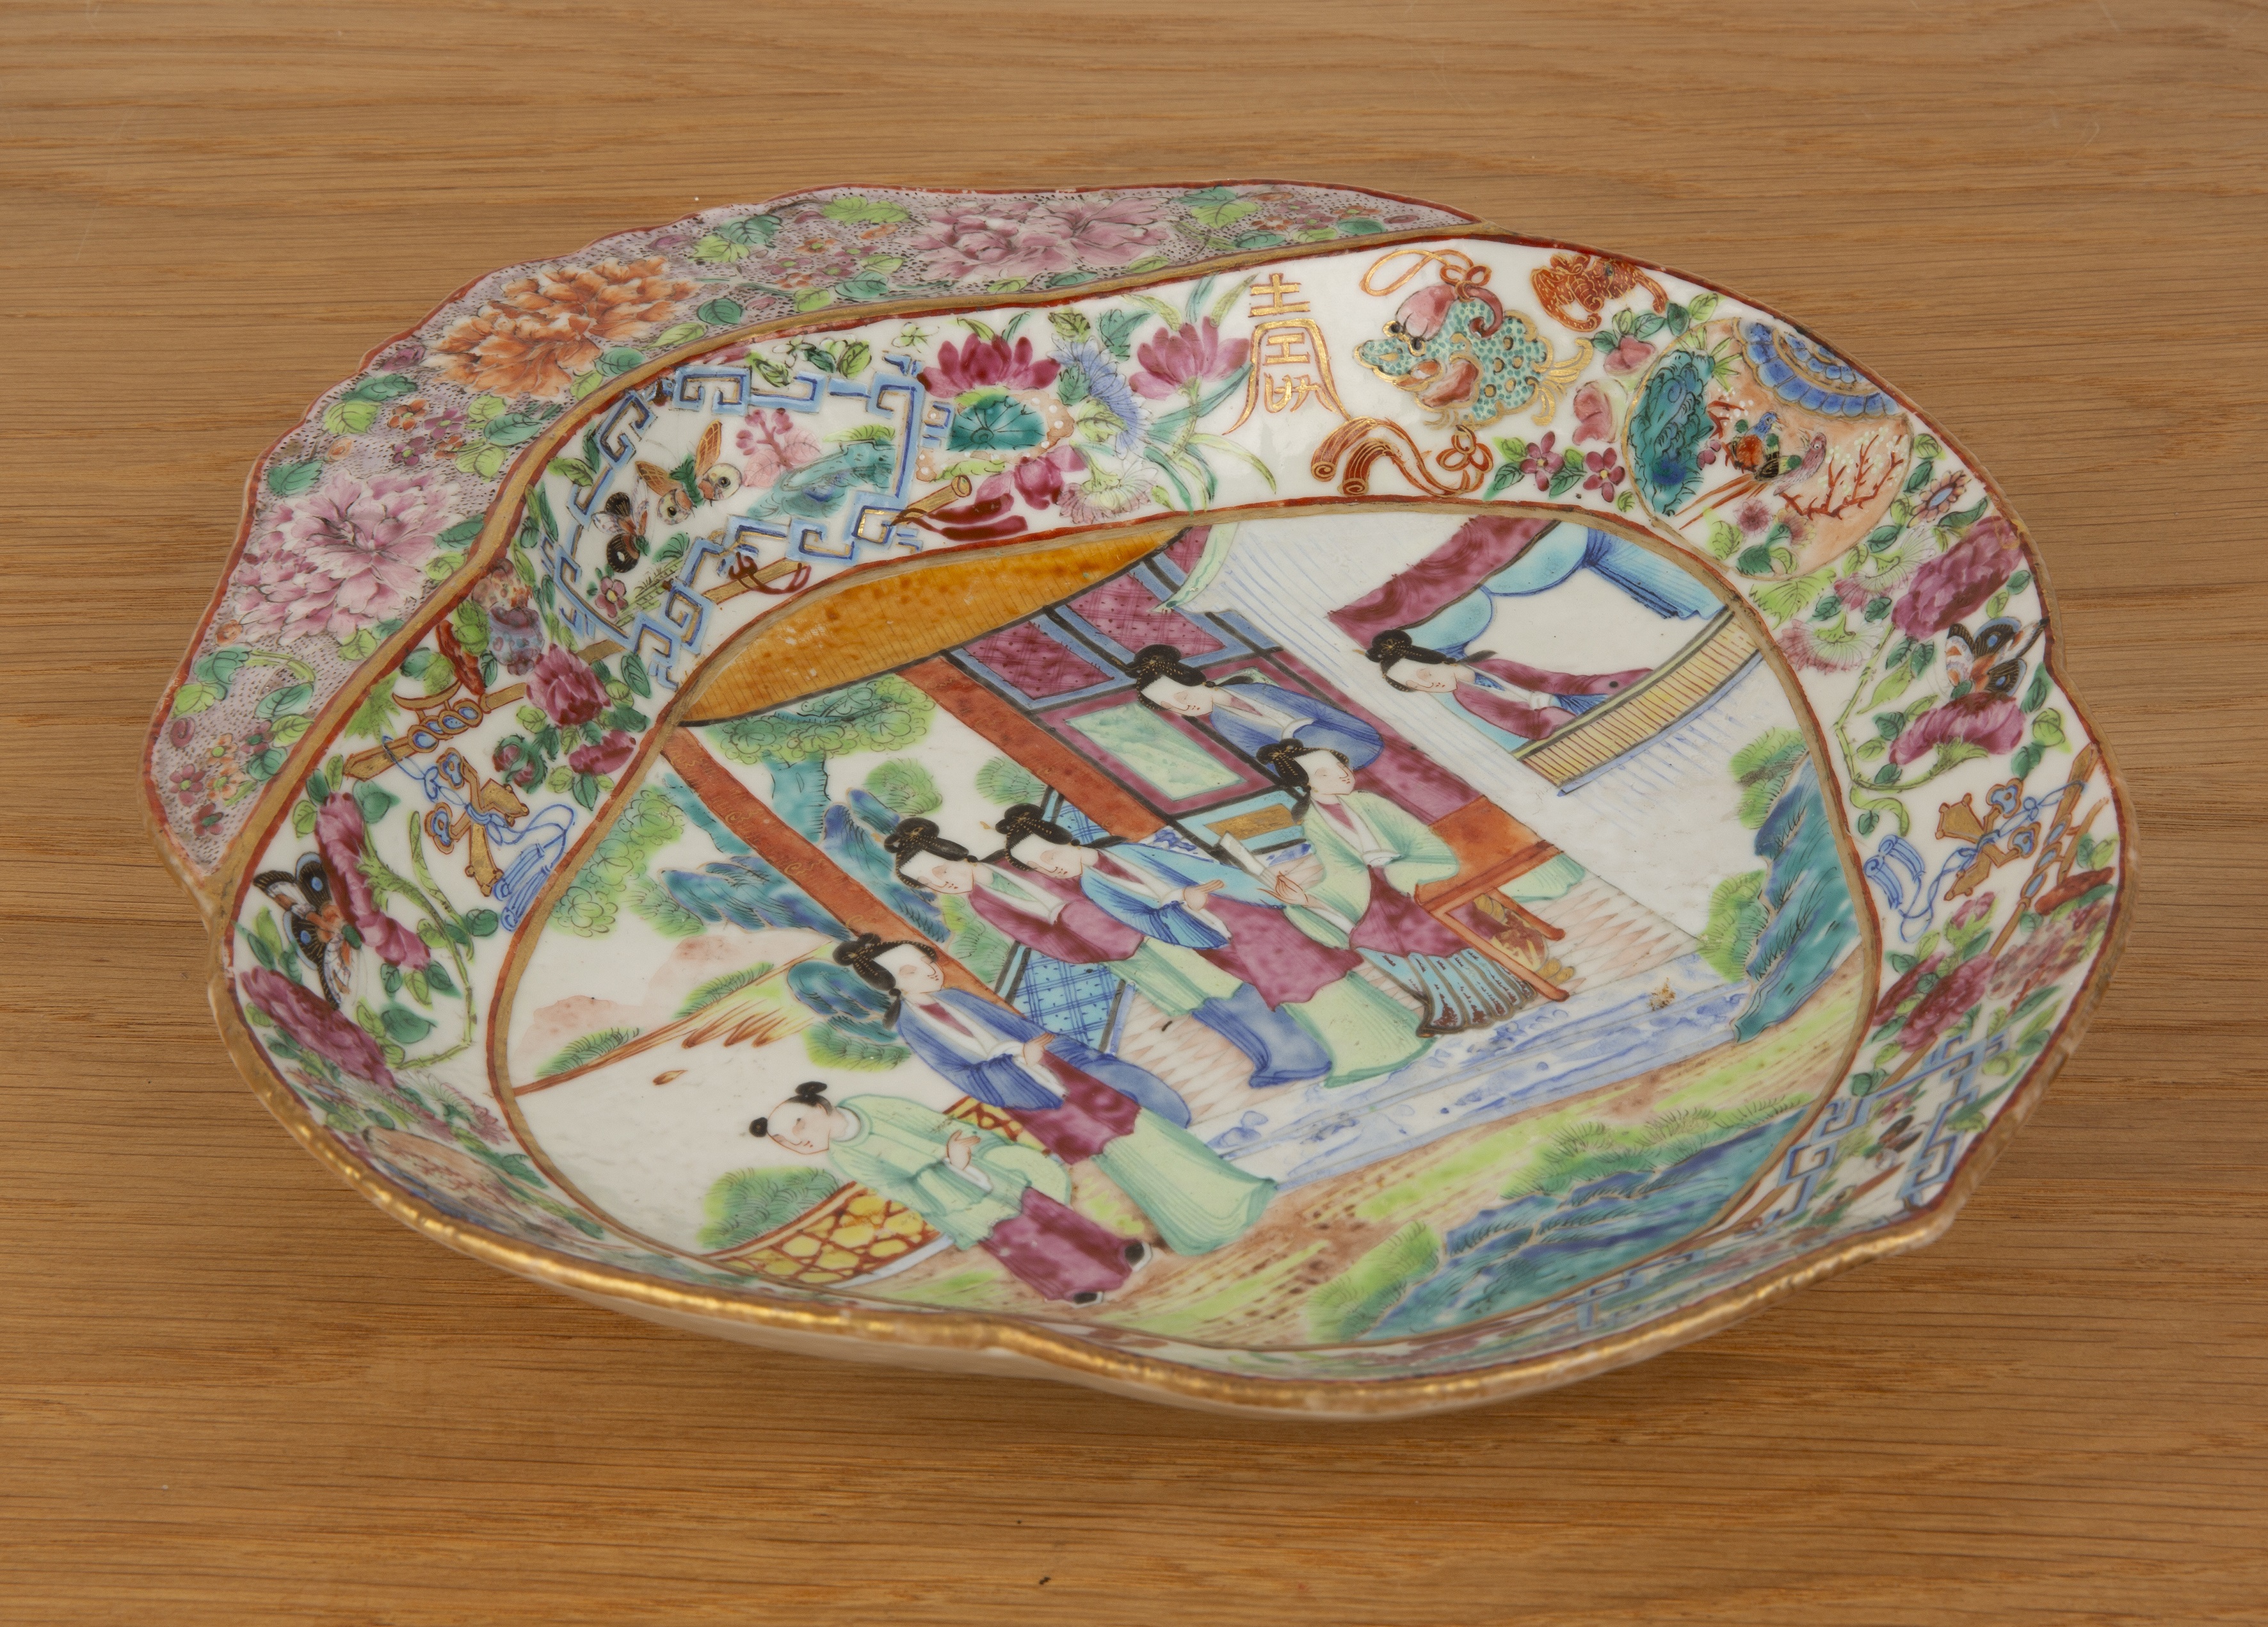 Canton polychrome porcelain shaped dish Chinese, 19th Century painted with ladies on and looking out - Image 2 of 3